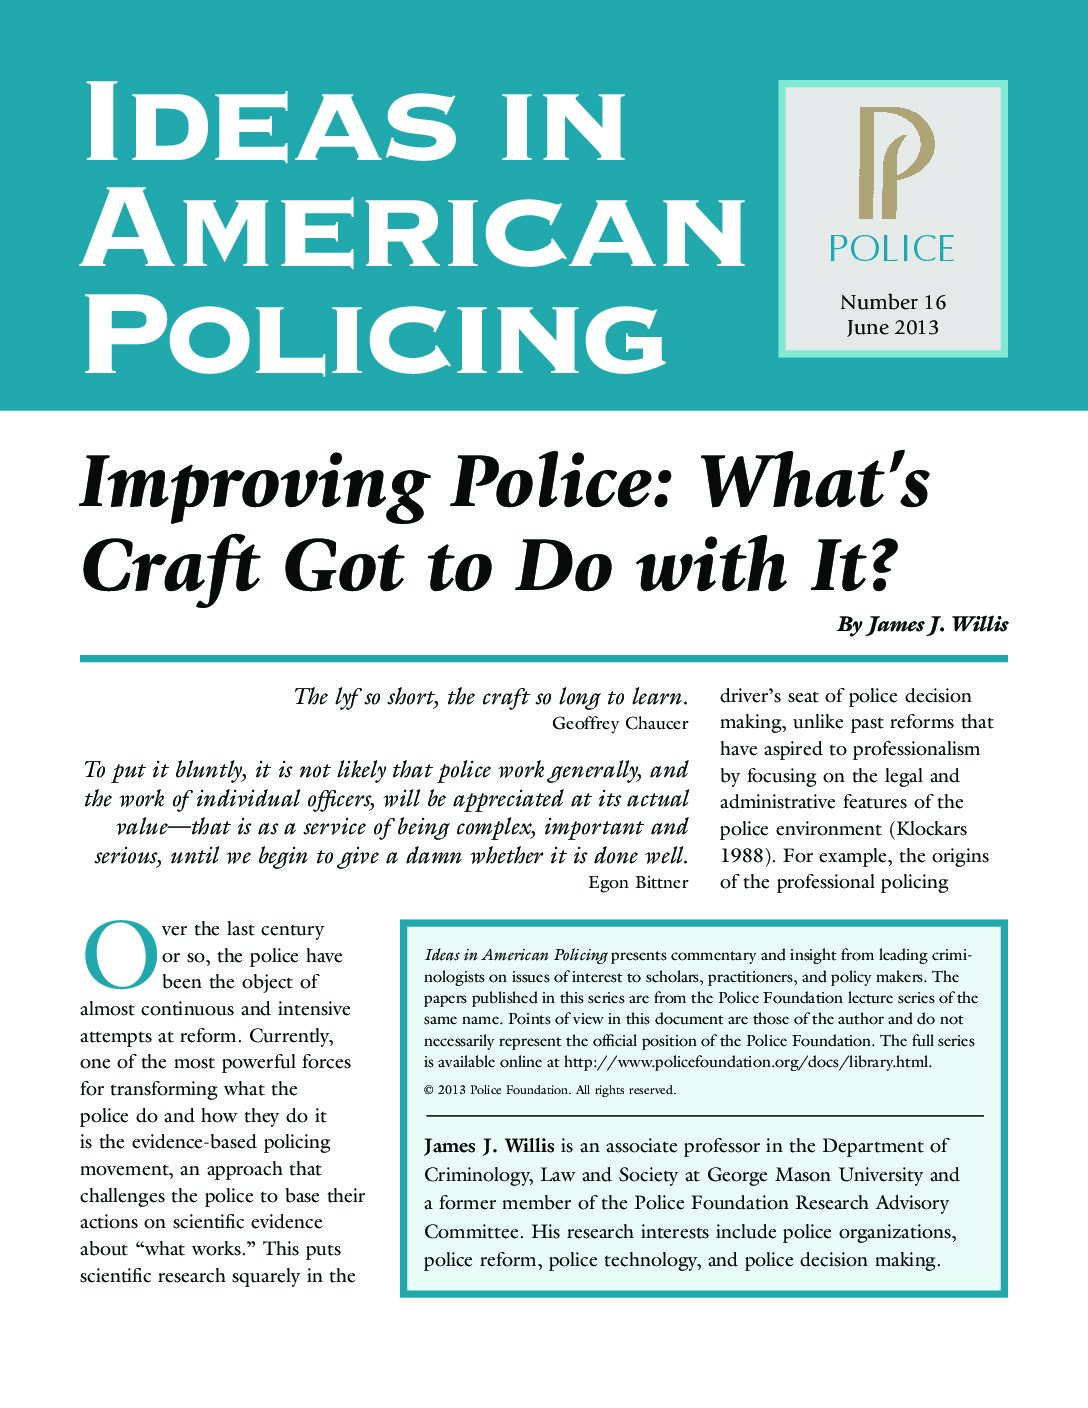 IAP - Improving Policing-Whats craft got to do with it?